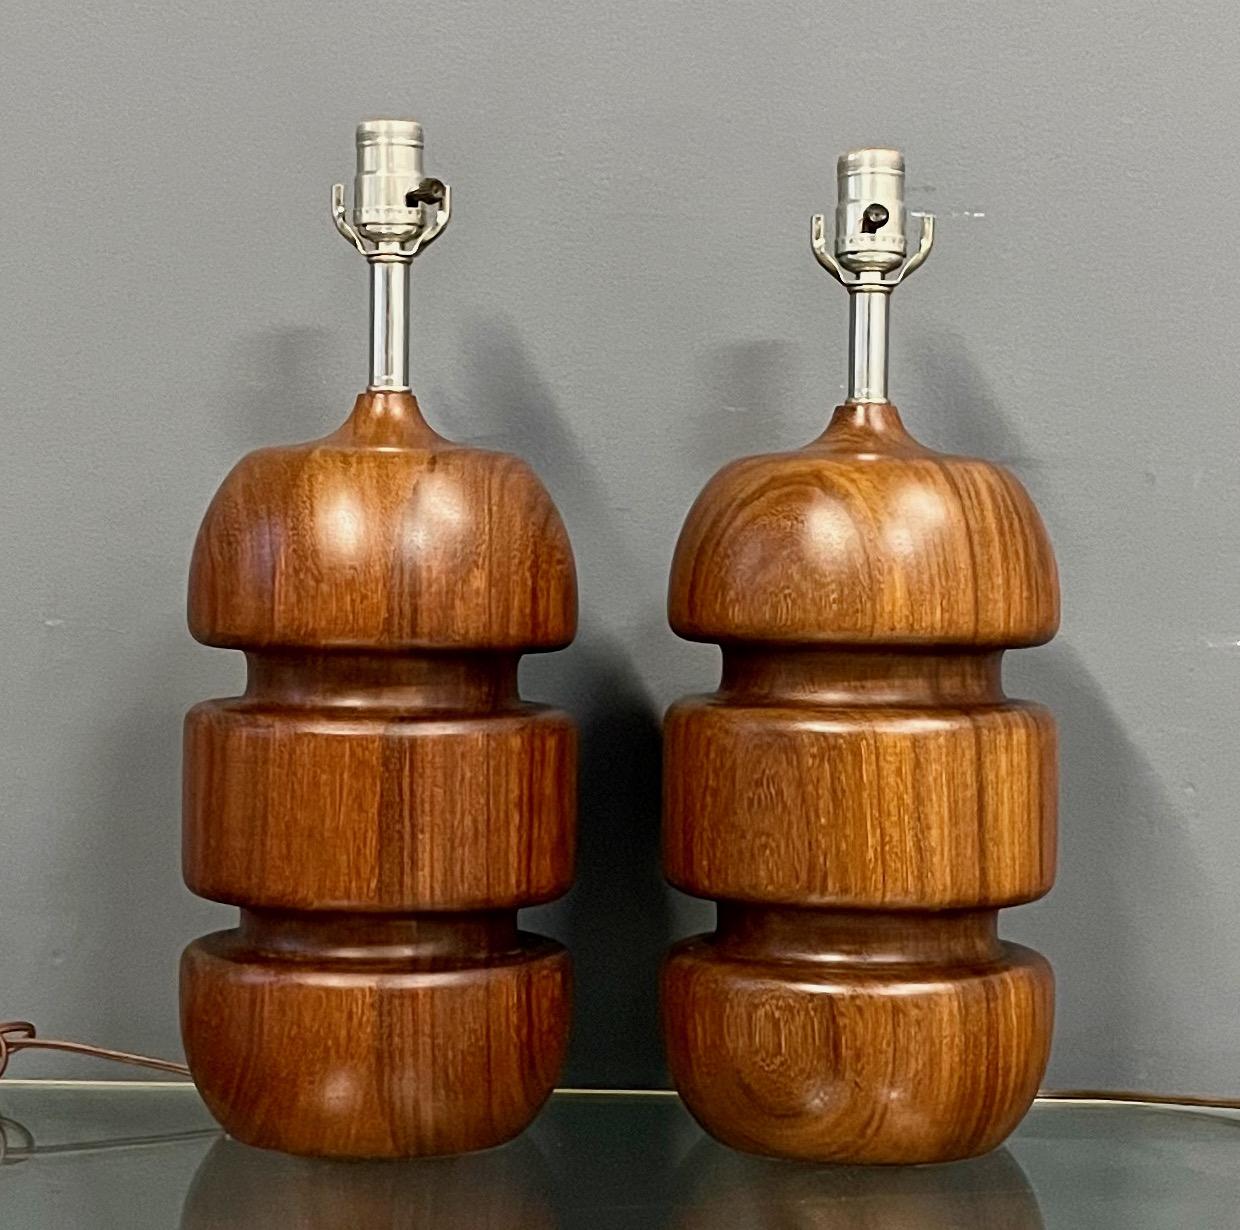 Wonderful pair of turned lamps in teak and are a classic of mid century design. These lamps have a wonderful oiled finish.